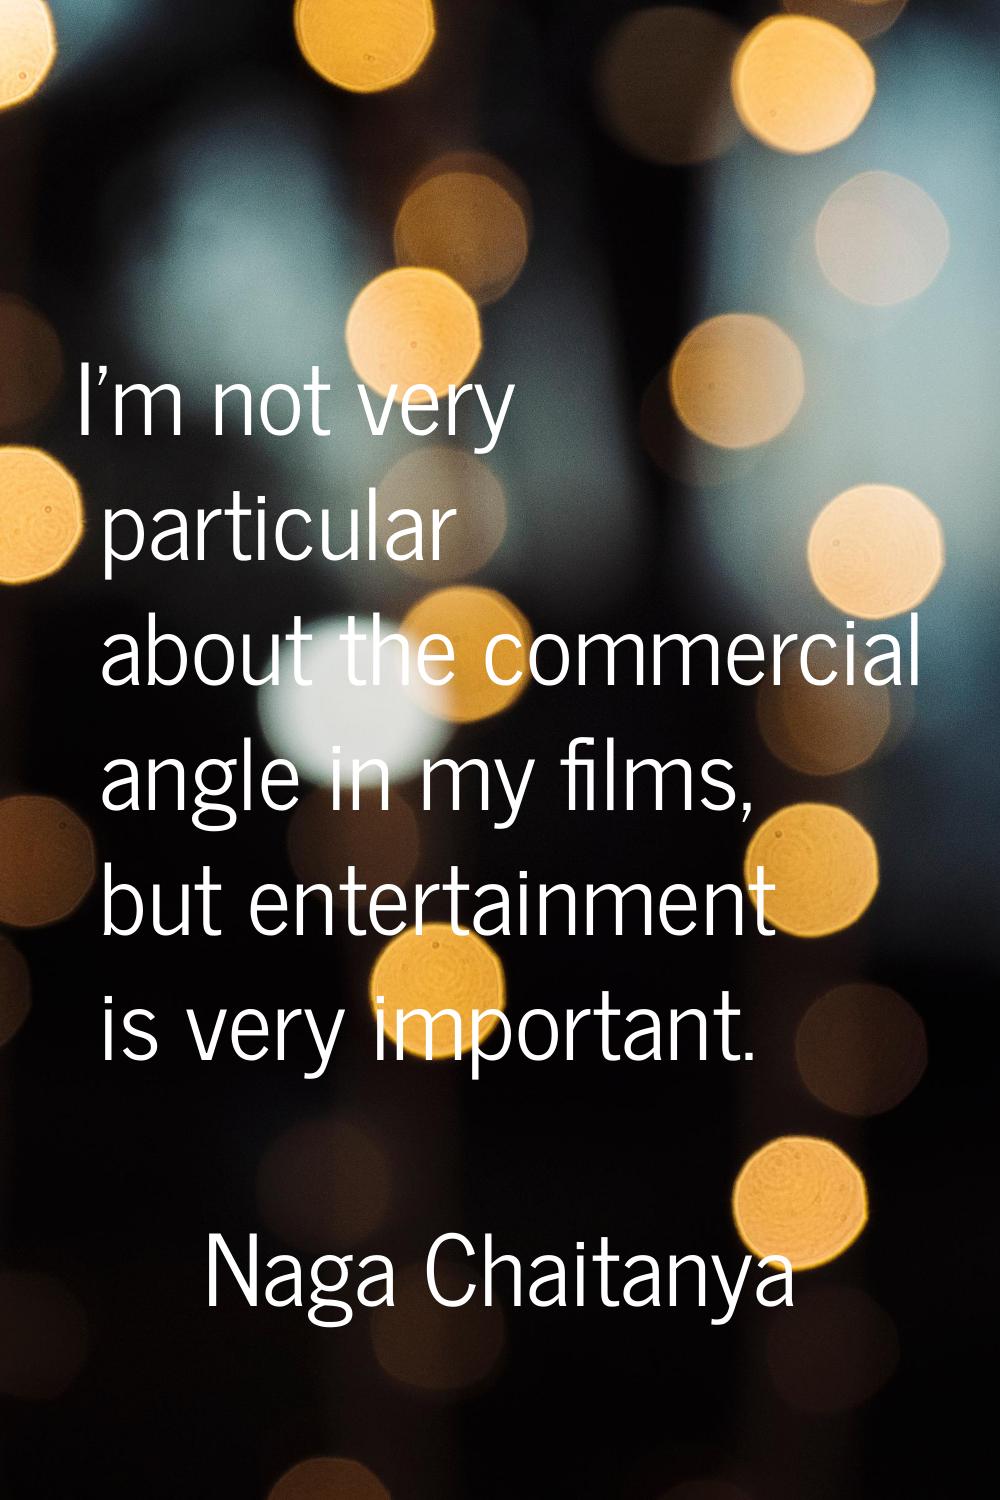 I'm not very particular about the commercial angle in my films, but entertainment is very important